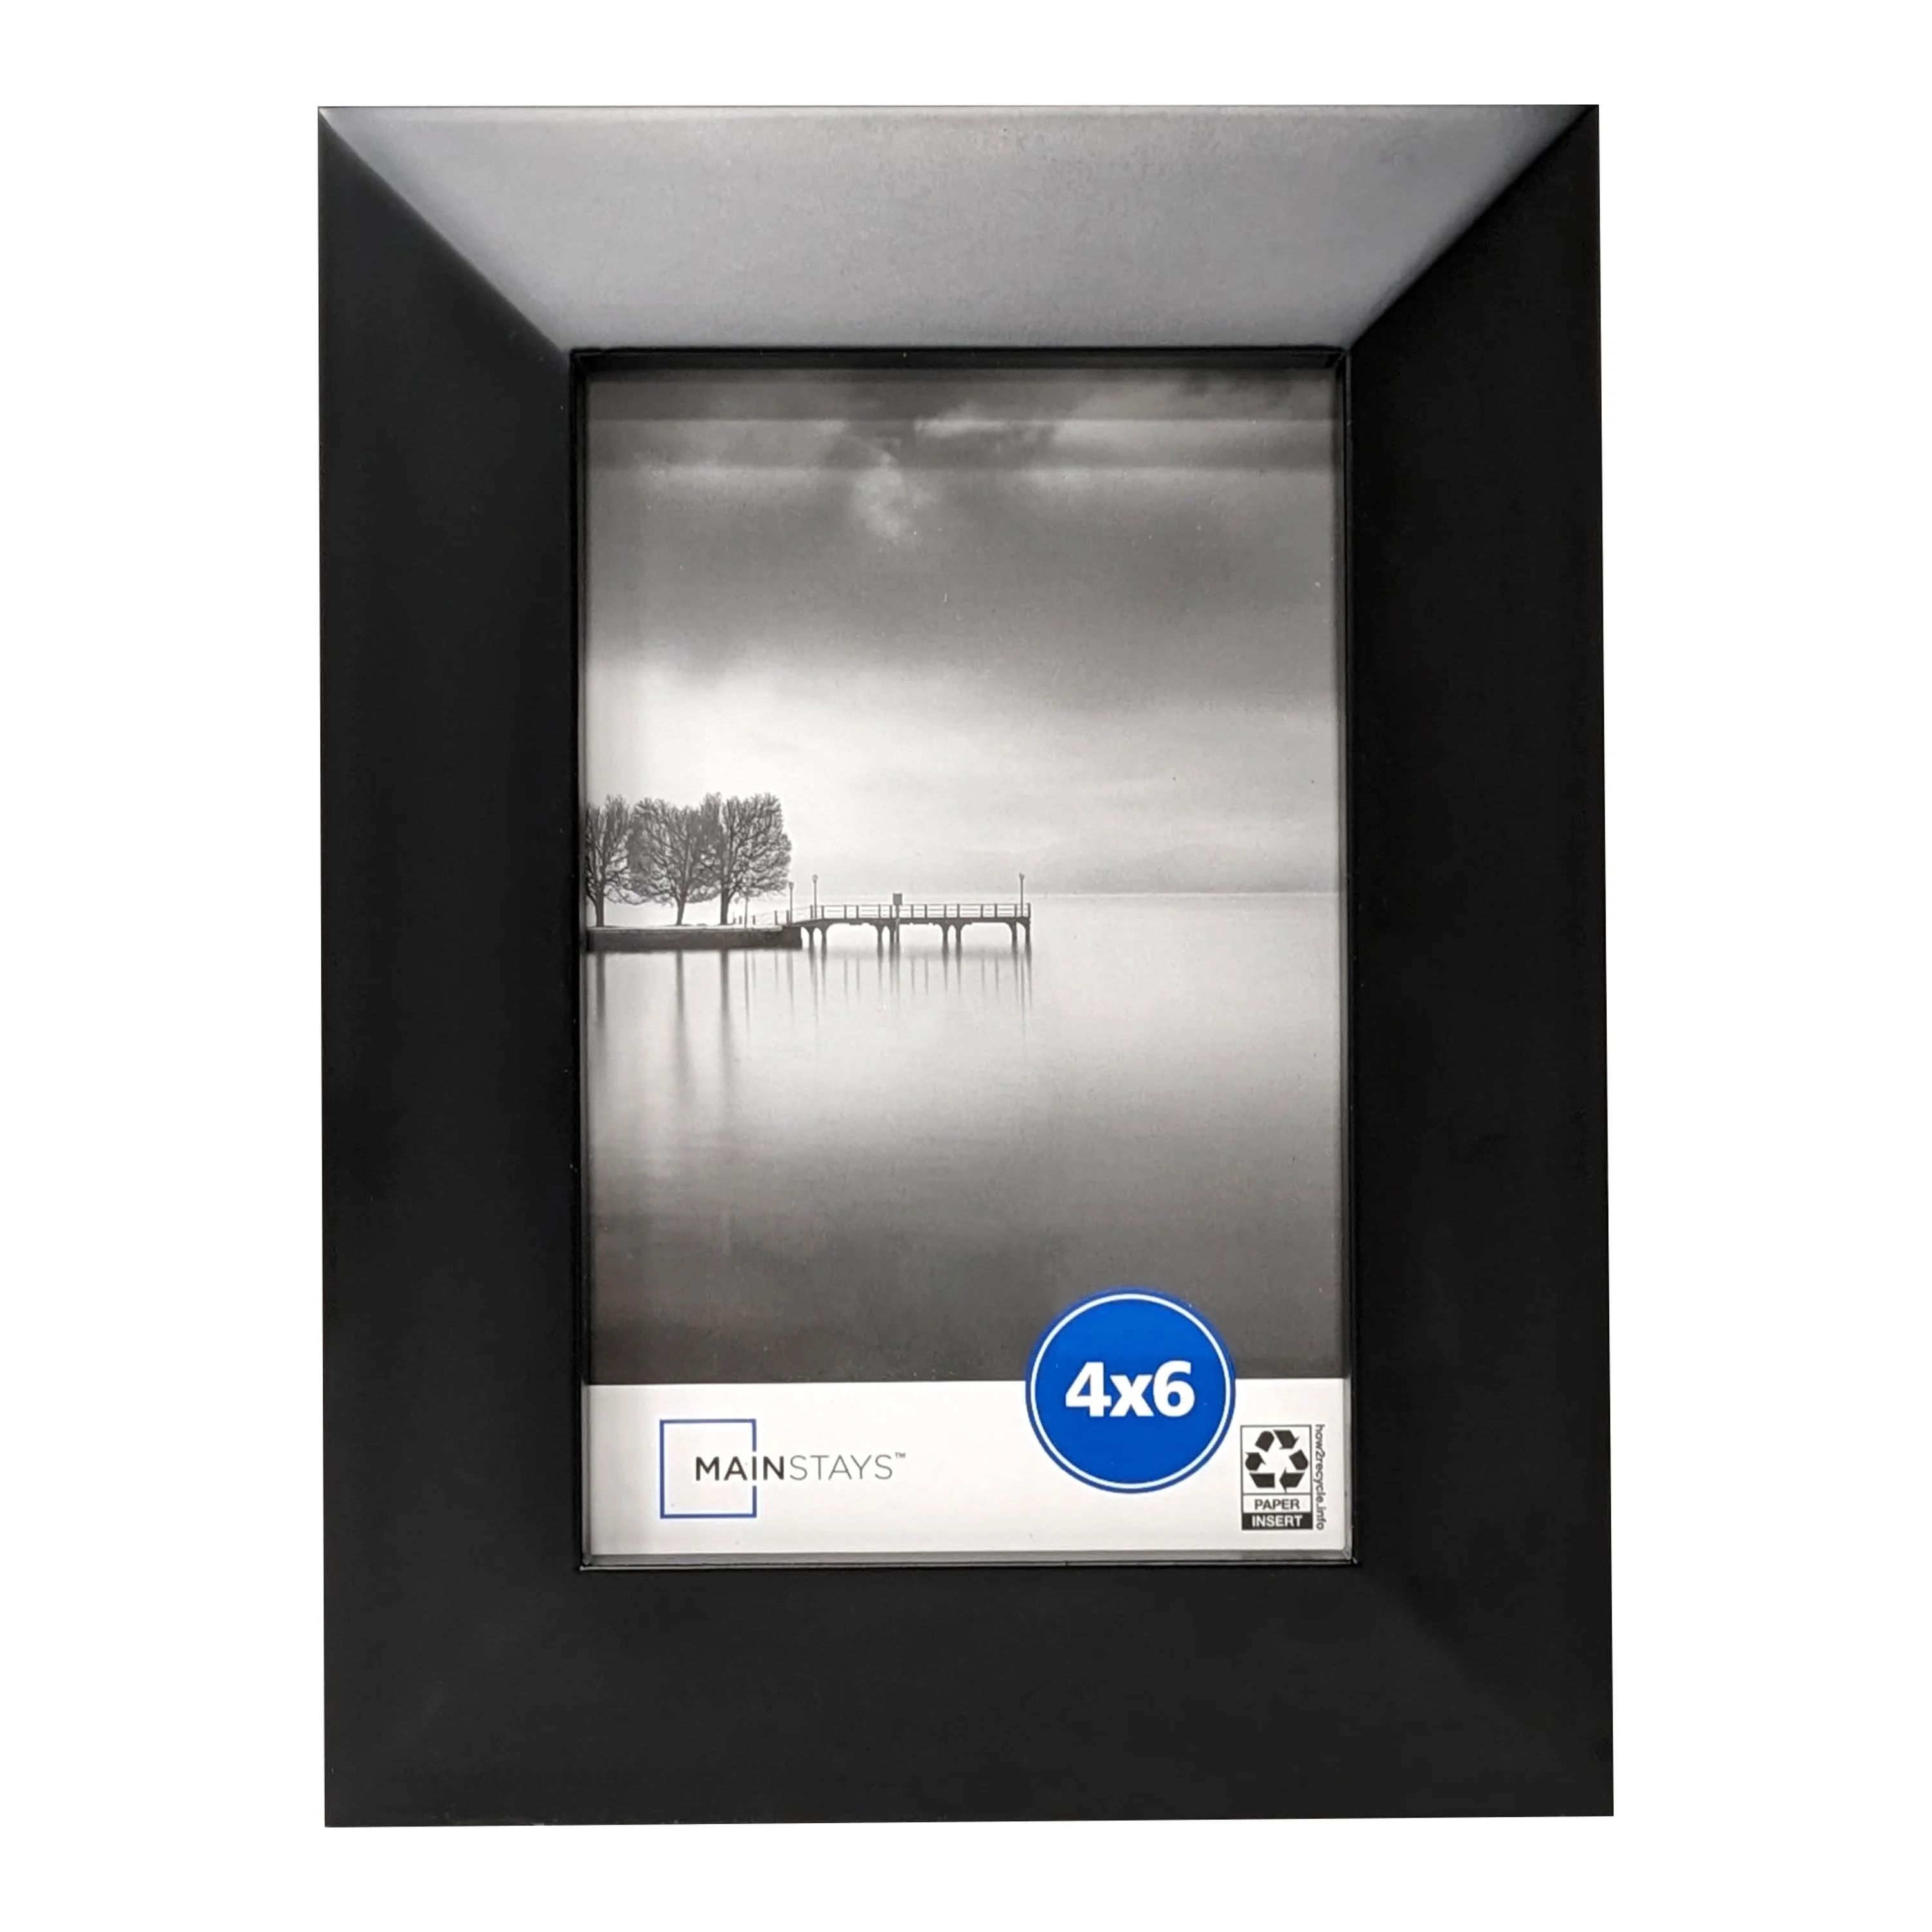 Mainstays 4x6 Bevel Gallery Tabletop Picture Frame, Black | Walmart (US)